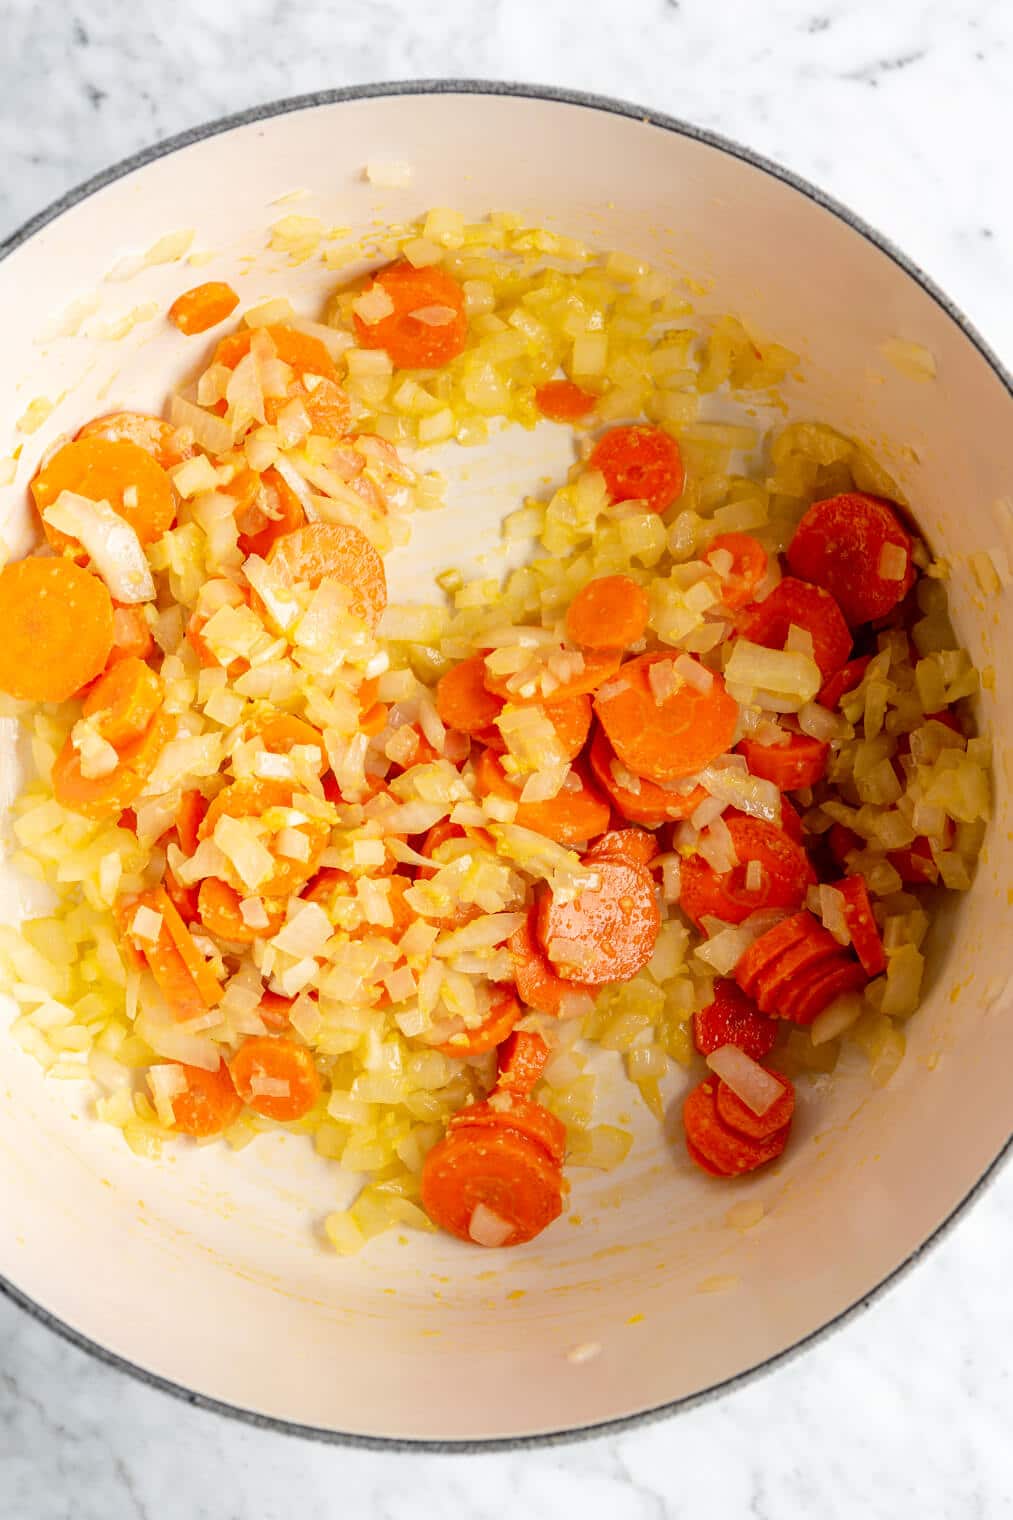 Top down view of carrots and onions mixed with spices in a white pot.